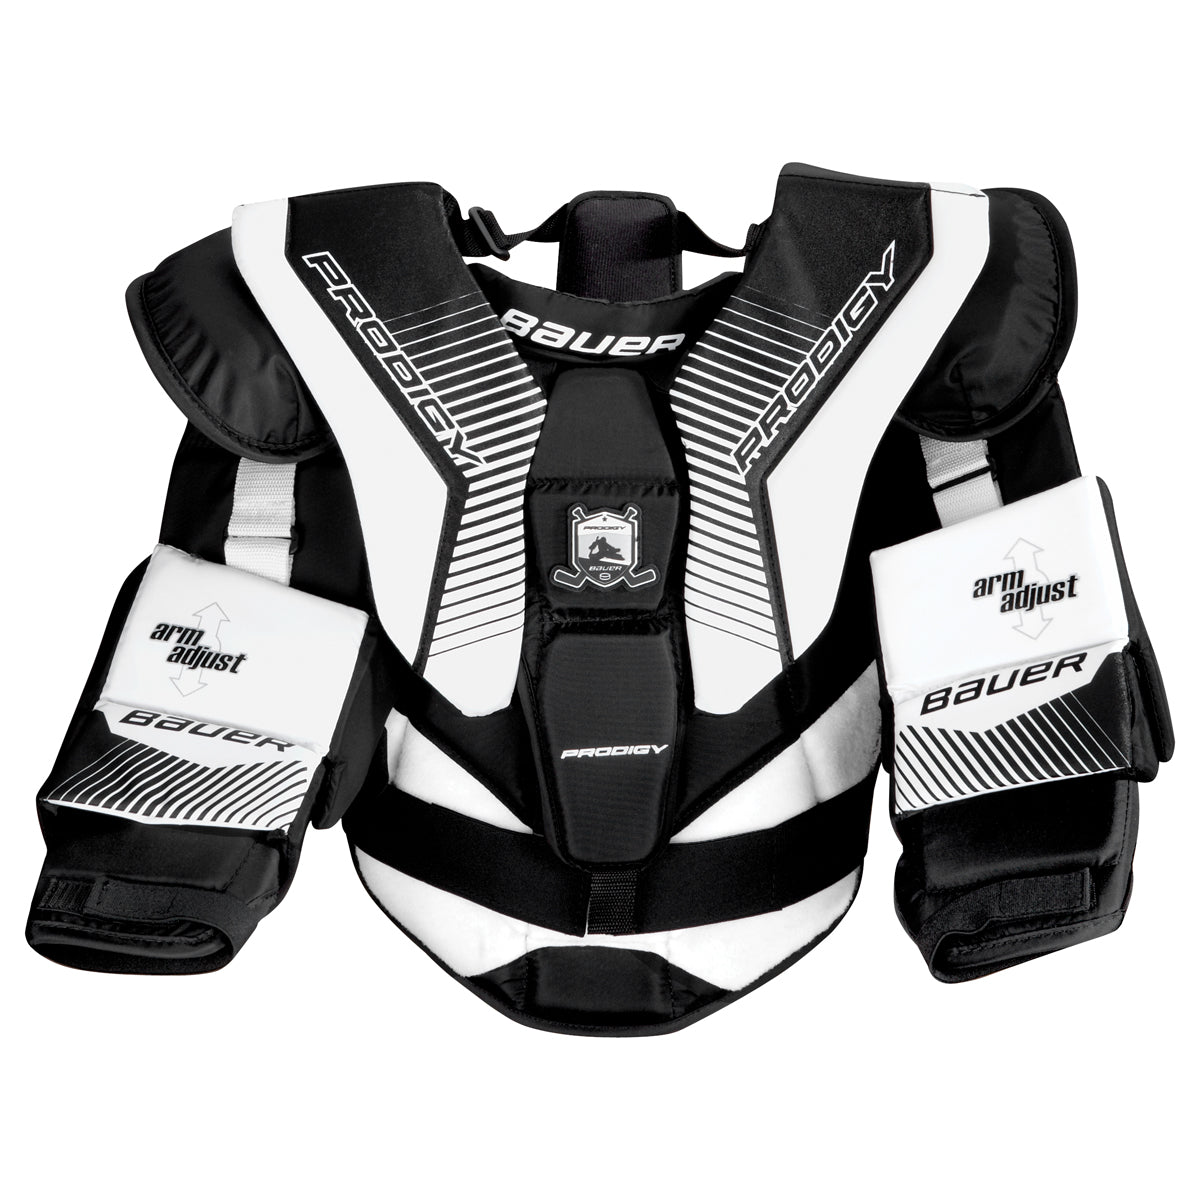 Bauer Prodigy 3.0 Chest Protector - Yth. (2017)